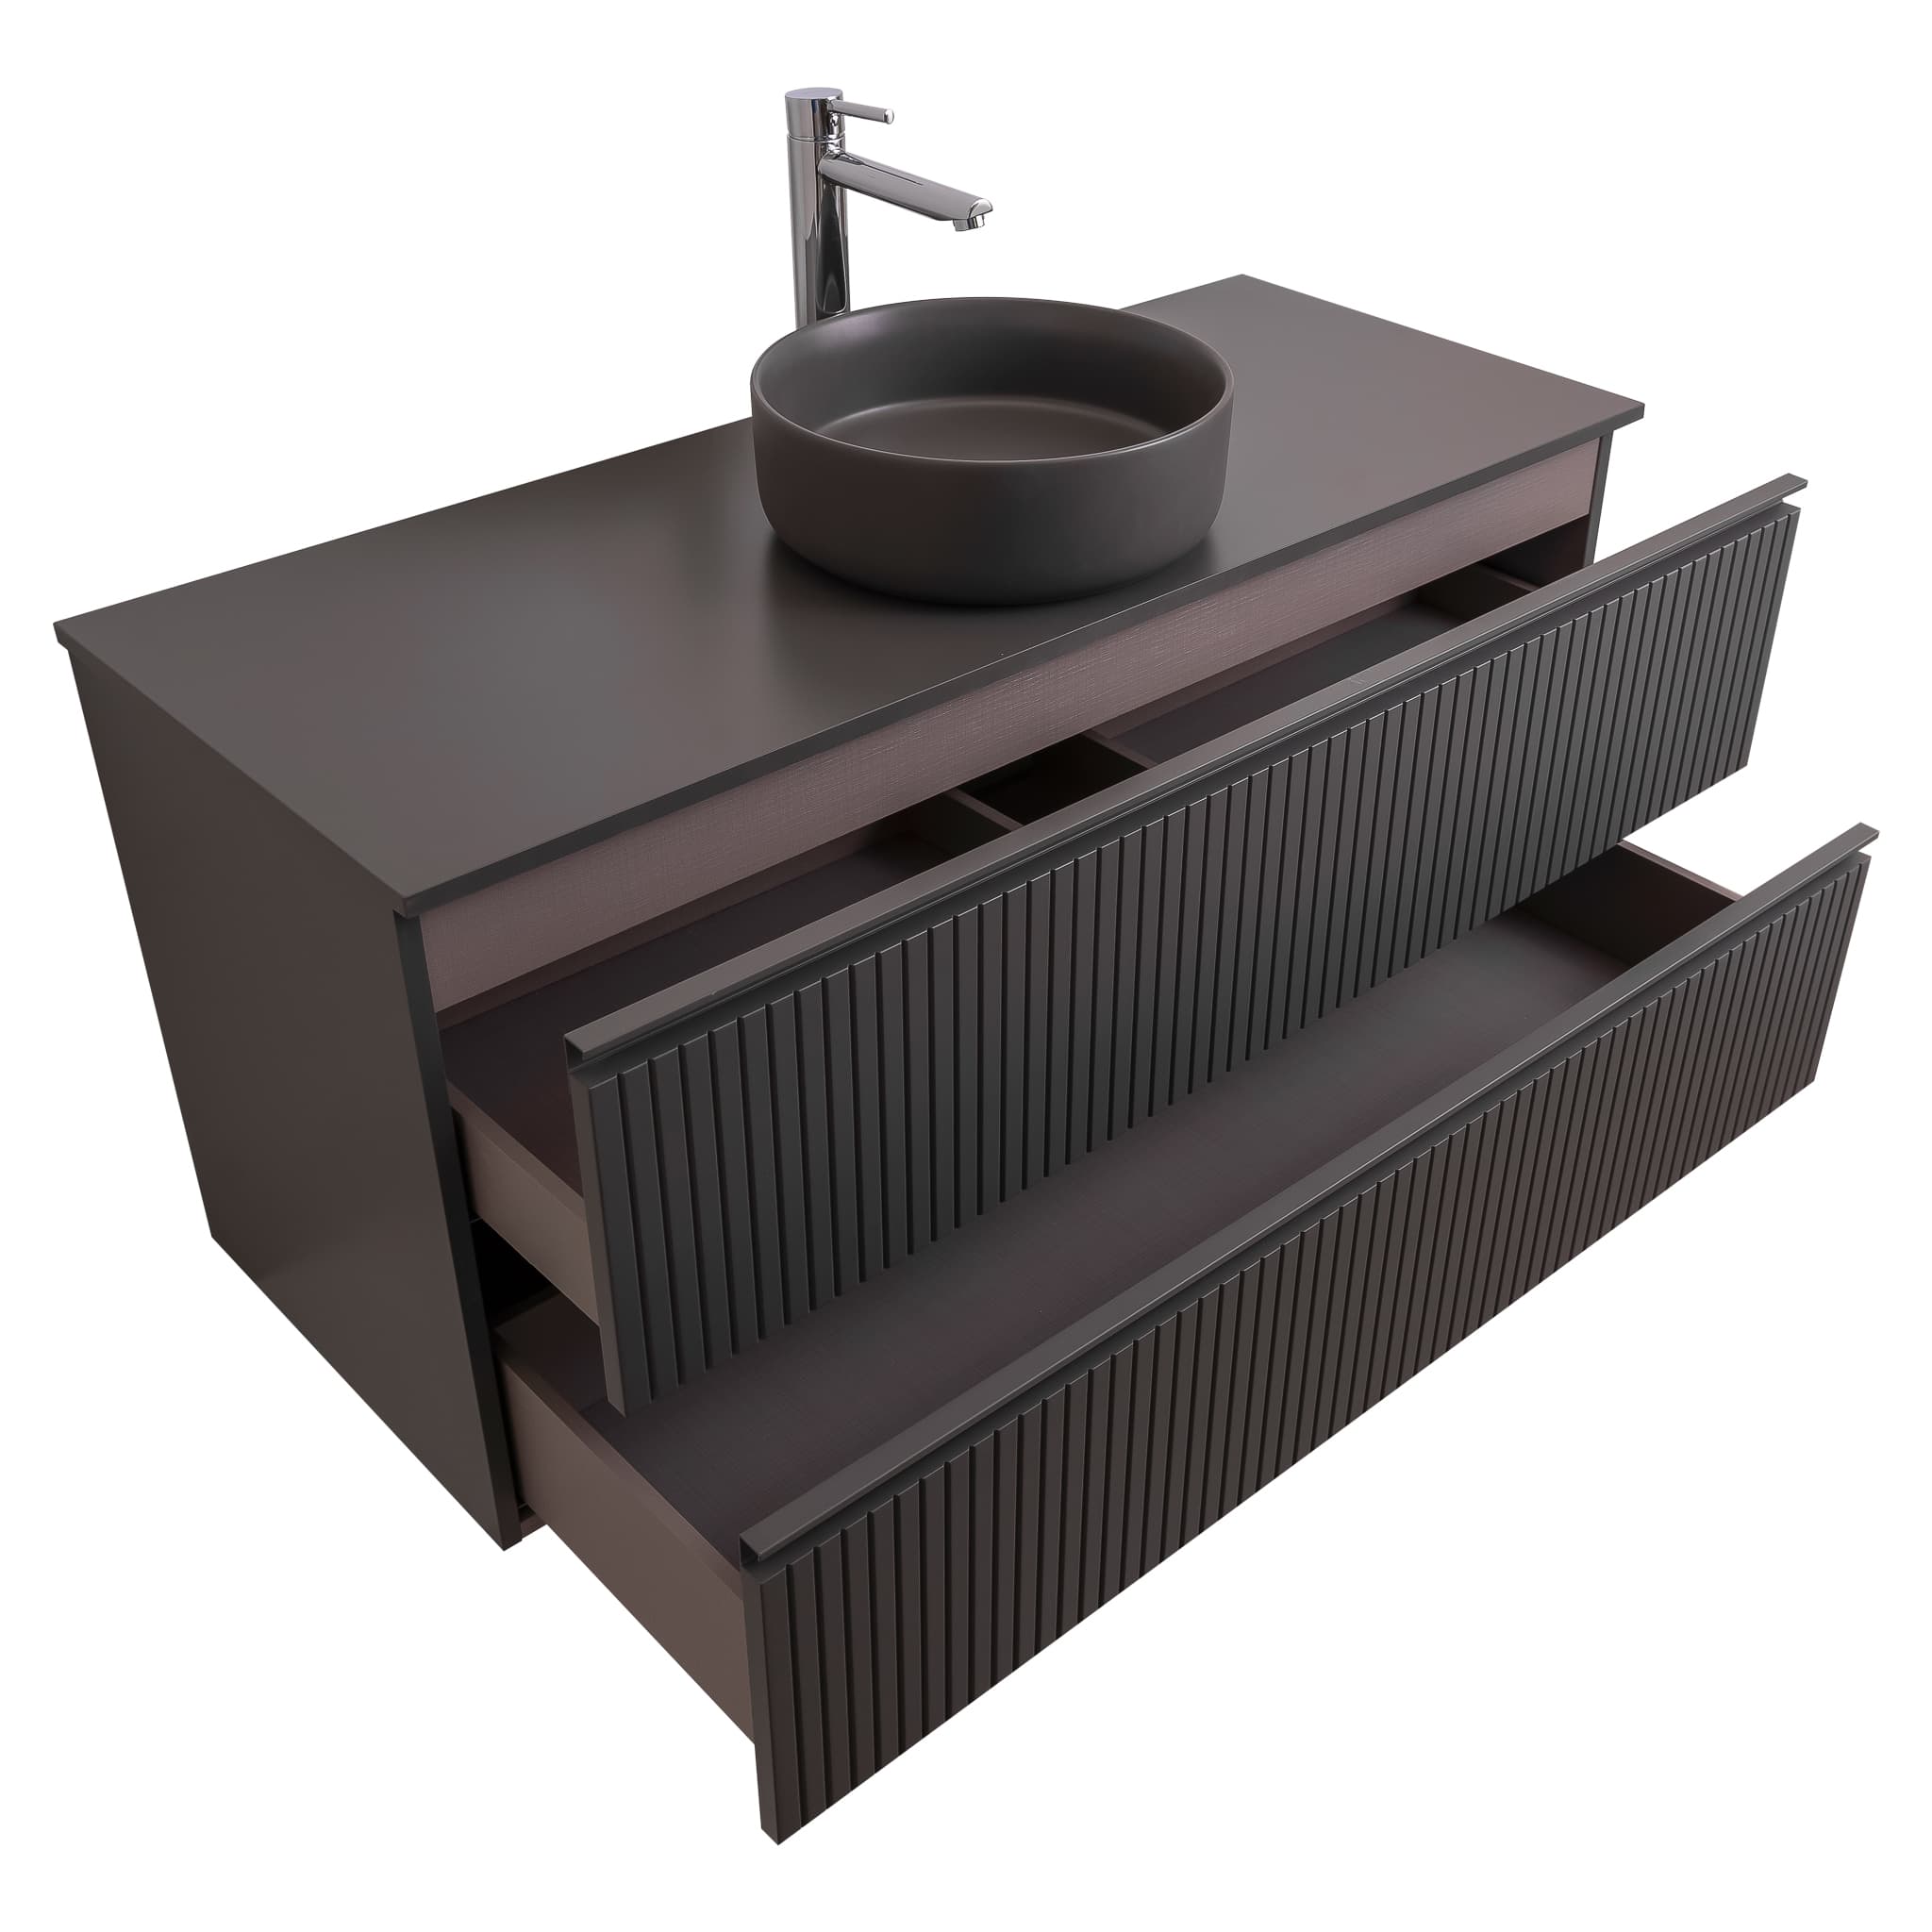 Ares 47.5 Matte Grey Cabinet, Ares Grey Ceniza Top And Ares Grey Ceniza Ceramic Basin, Wall Mounted Modern Vanity Set